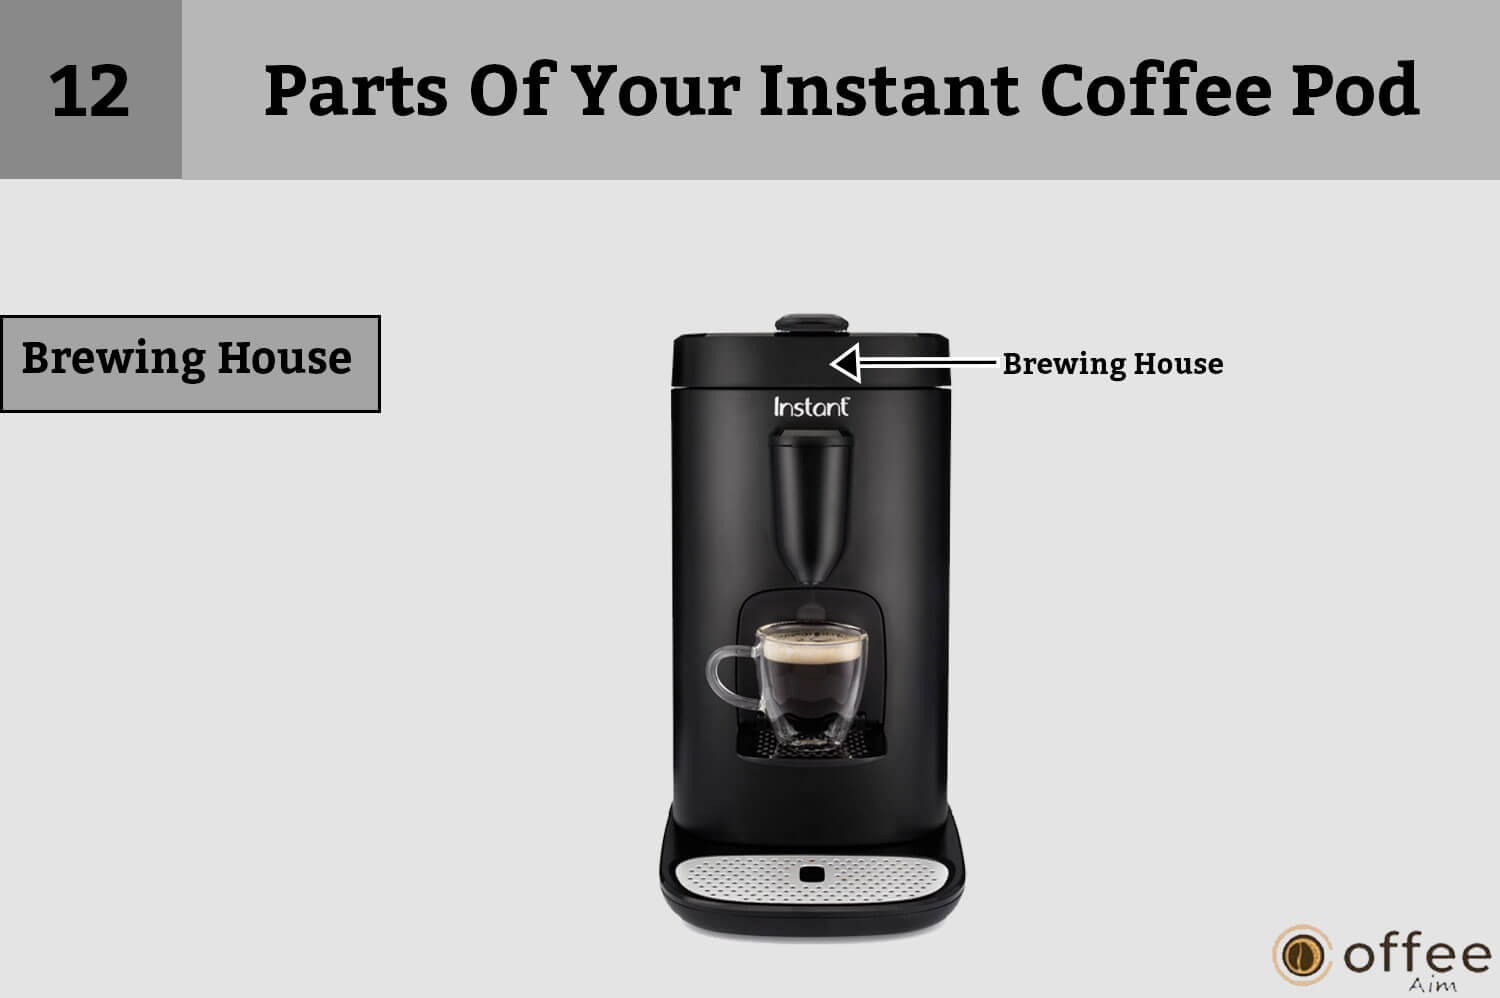 This image illustrates the "Brewing House" as part of the "Parts Of Your Instant Coffee Pod" in the article titled "How to Connect Nespresso Vertuo Creatista machine."